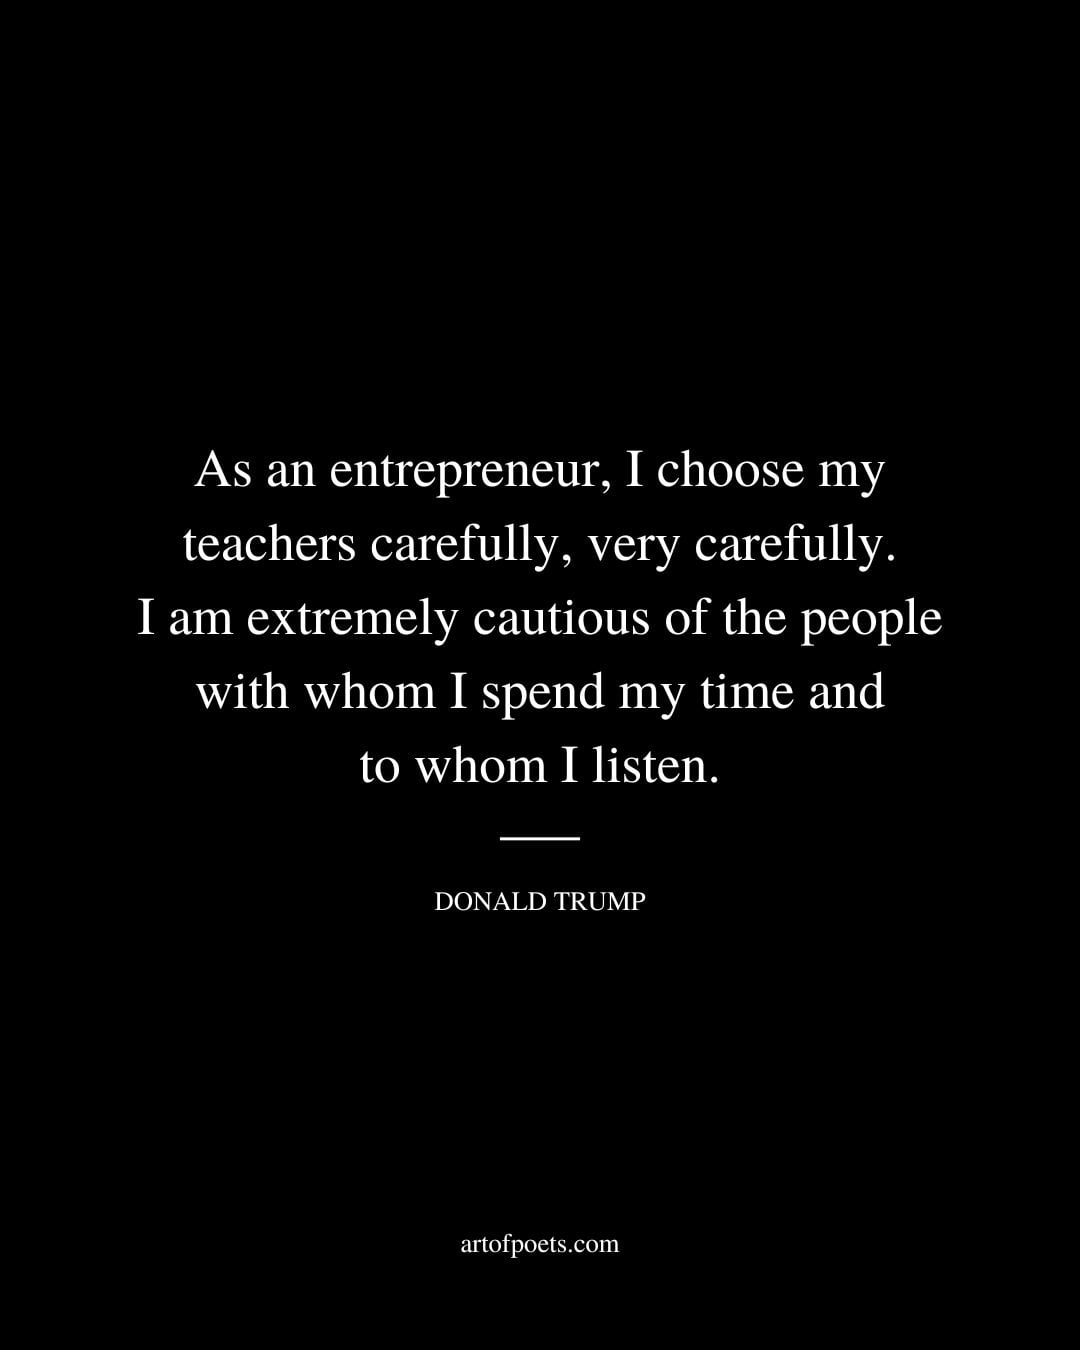 As an entrepreneur I choose my teachers carefully very carefully. I am extremely cautious of the people with whom I spend my time and to whom I listen